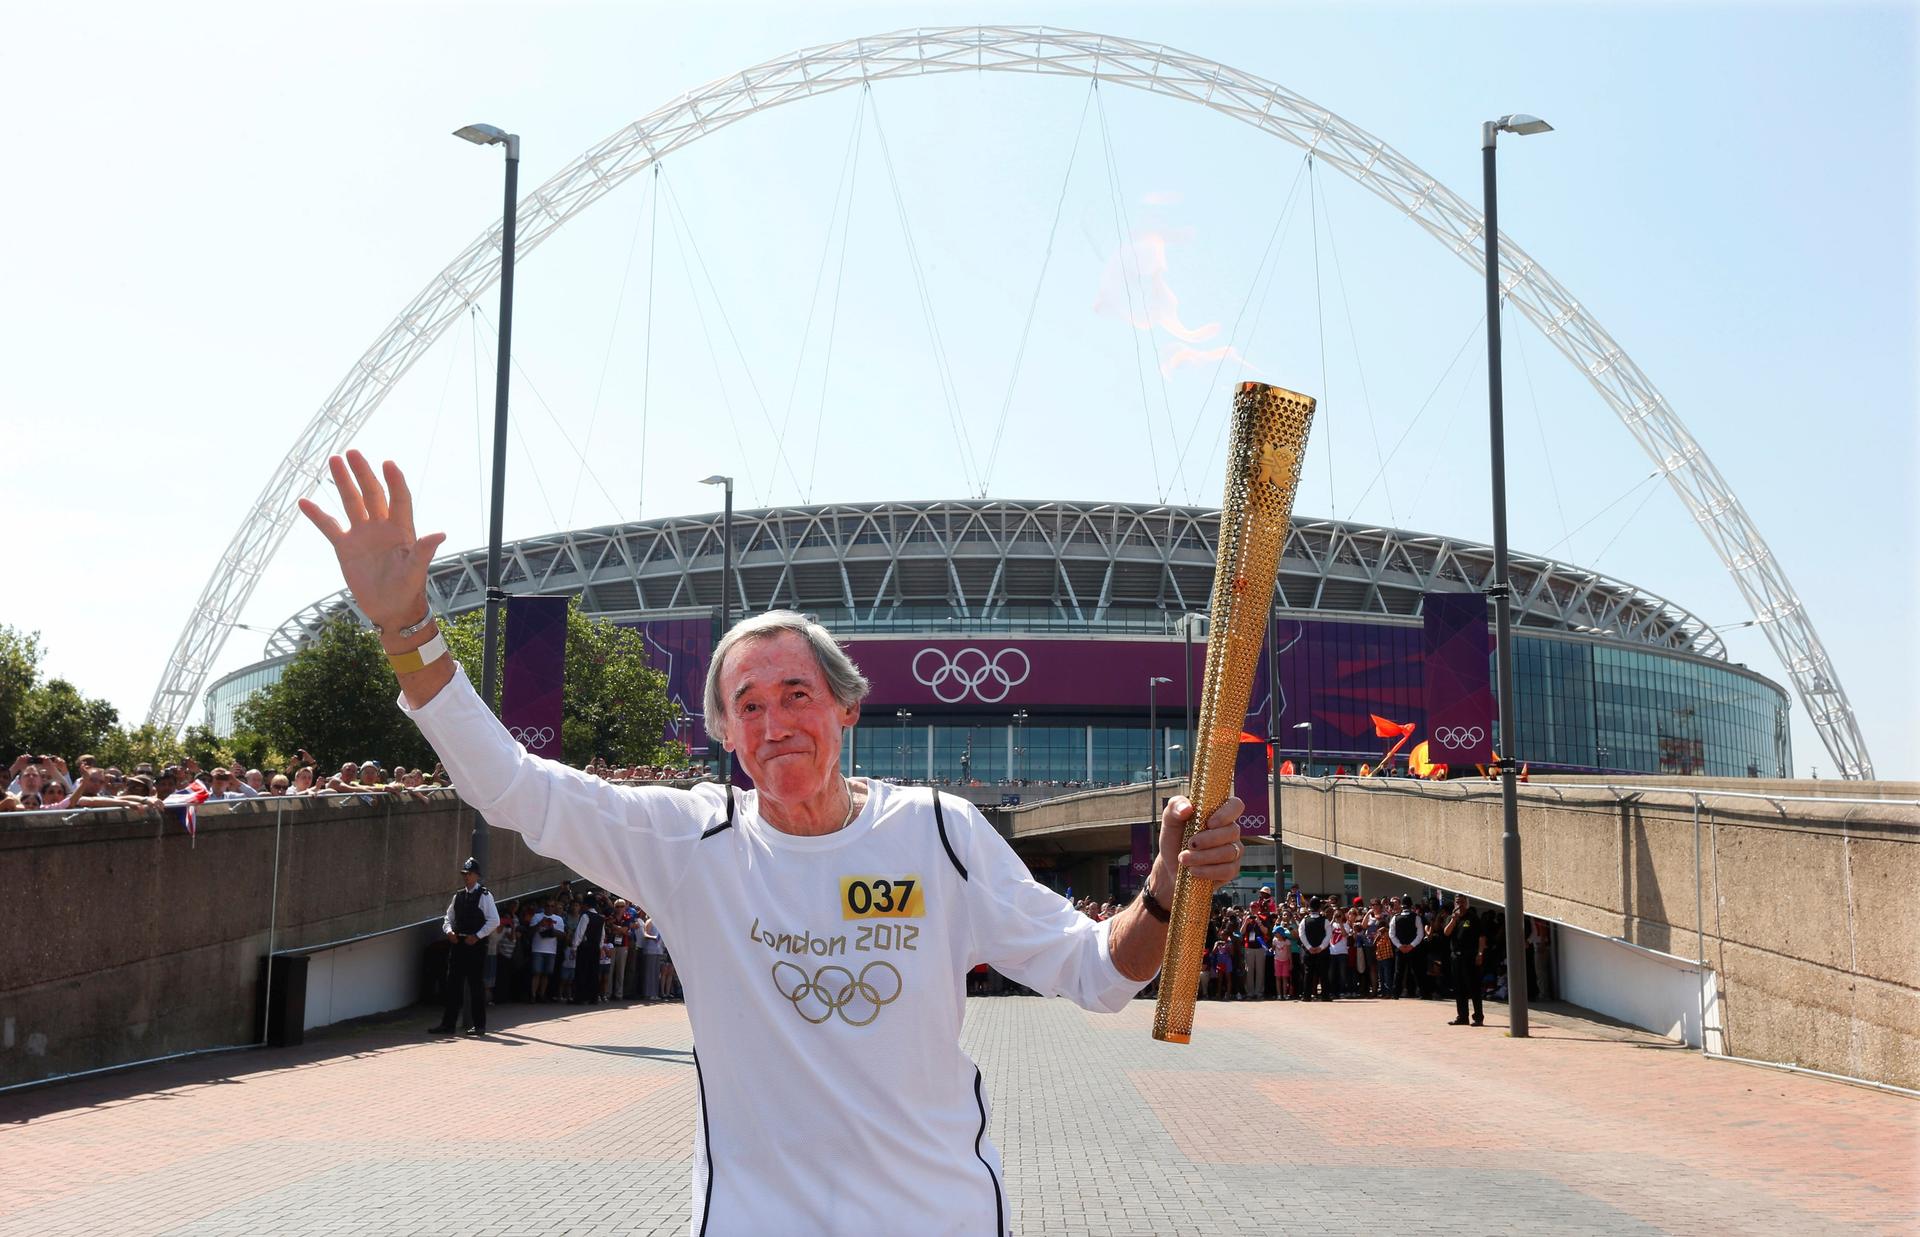 Gordon Banks runs with his arms up, one holding the olympic torch